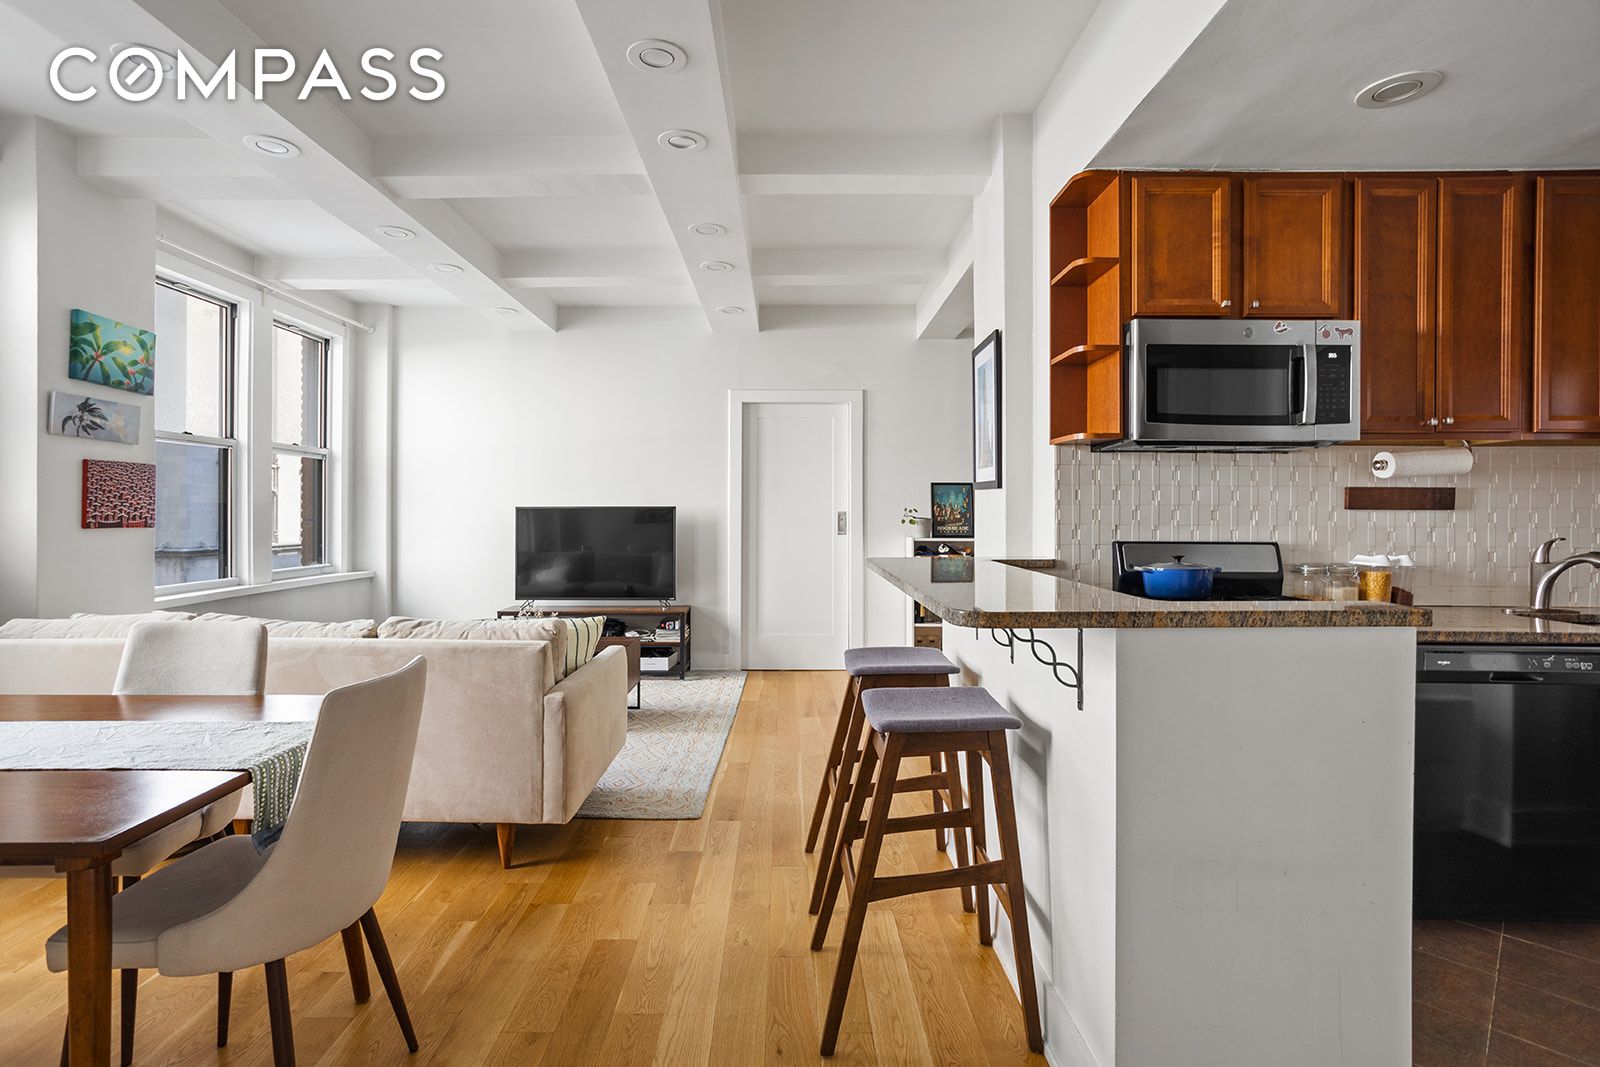 66 Madison Avenue 3Bc, Nomad, Downtown, NYC - 2 Bedrooms  
2 Bathrooms  
5 Rooms - 